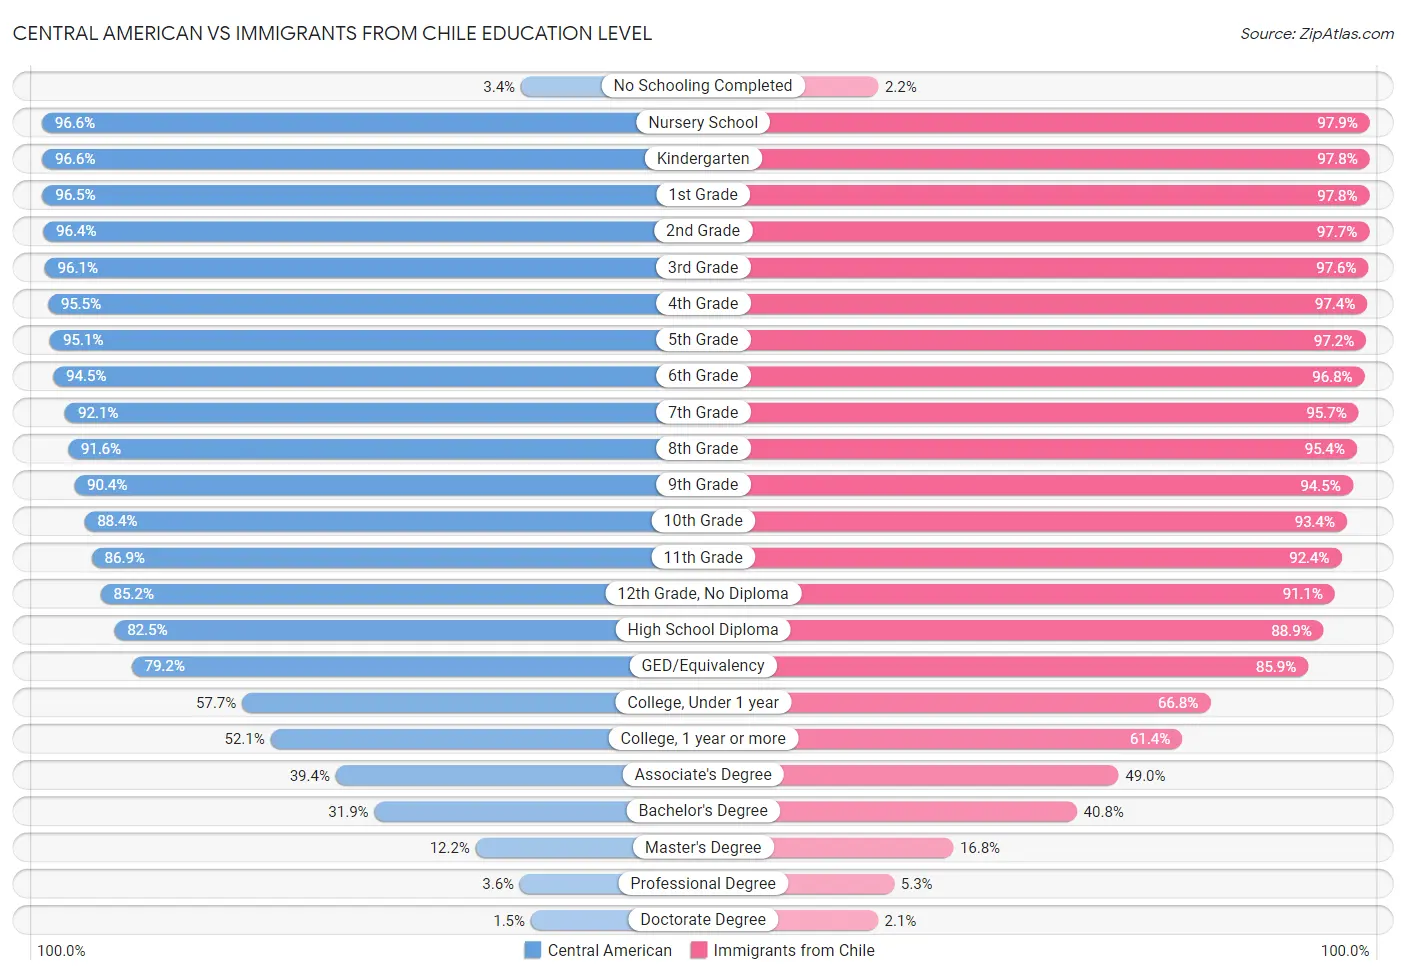 Central American vs Immigrants from Chile Education Level